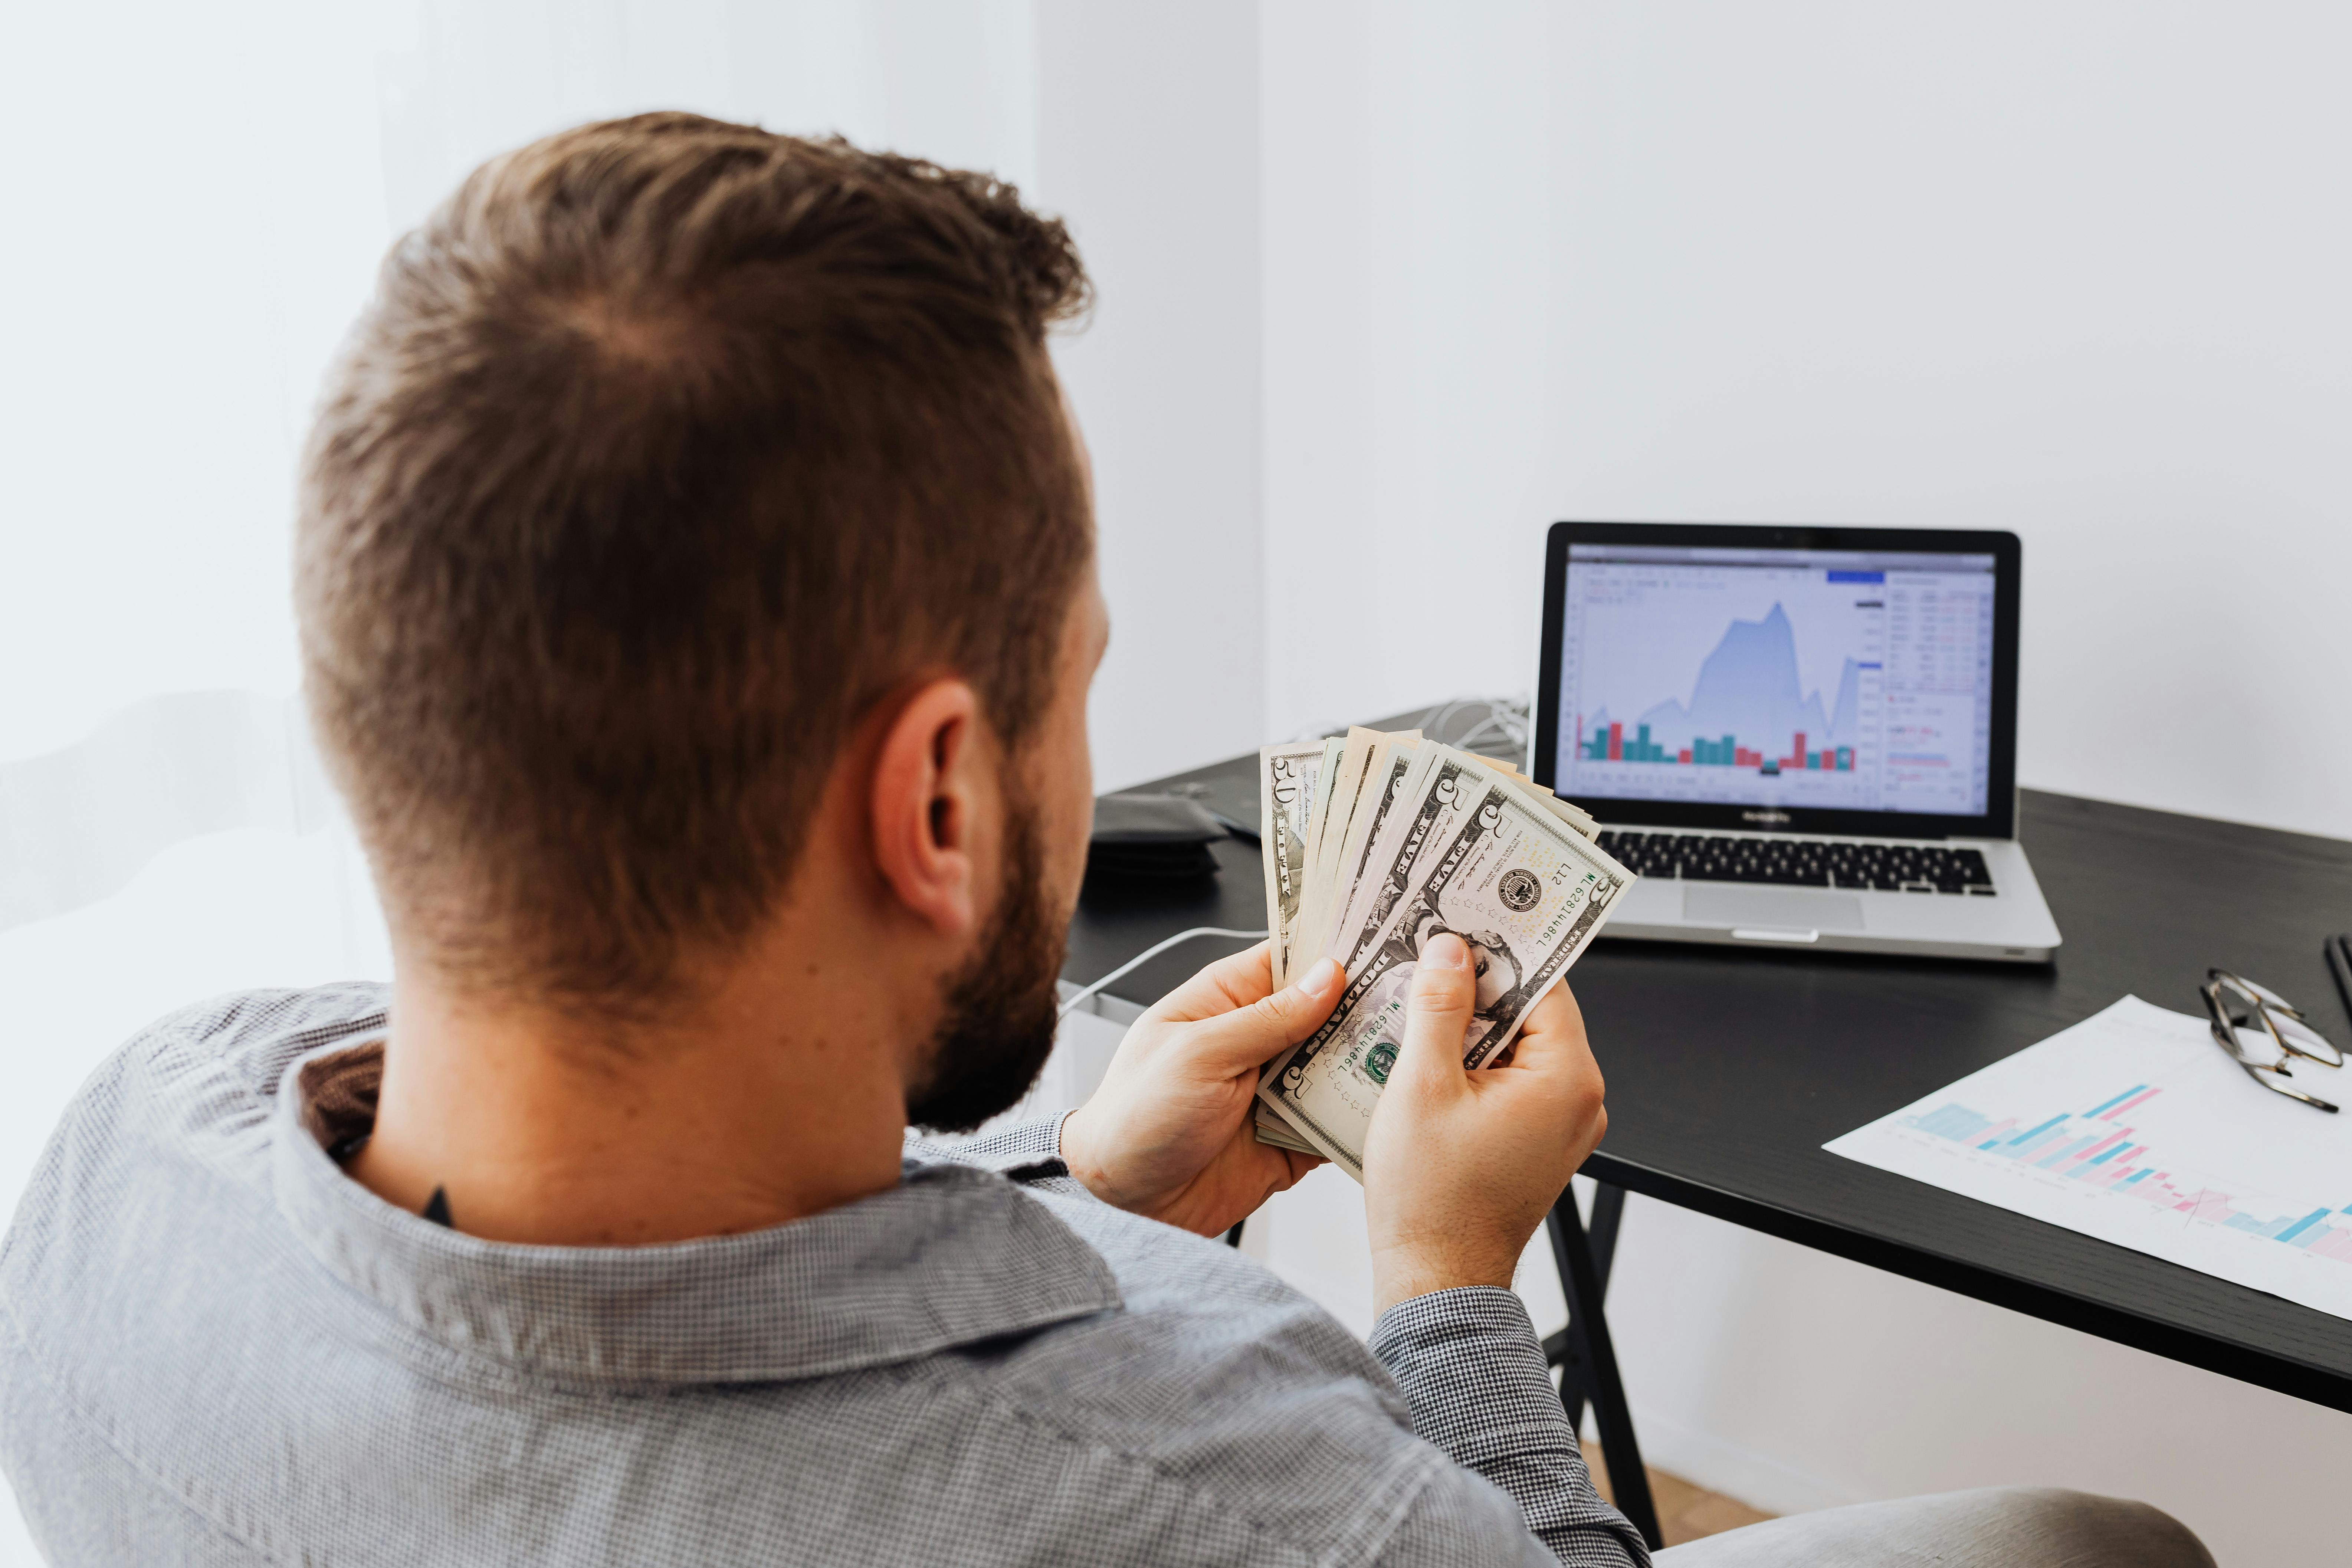 A man sitting in front of a laptop counting money | Source: Pexels